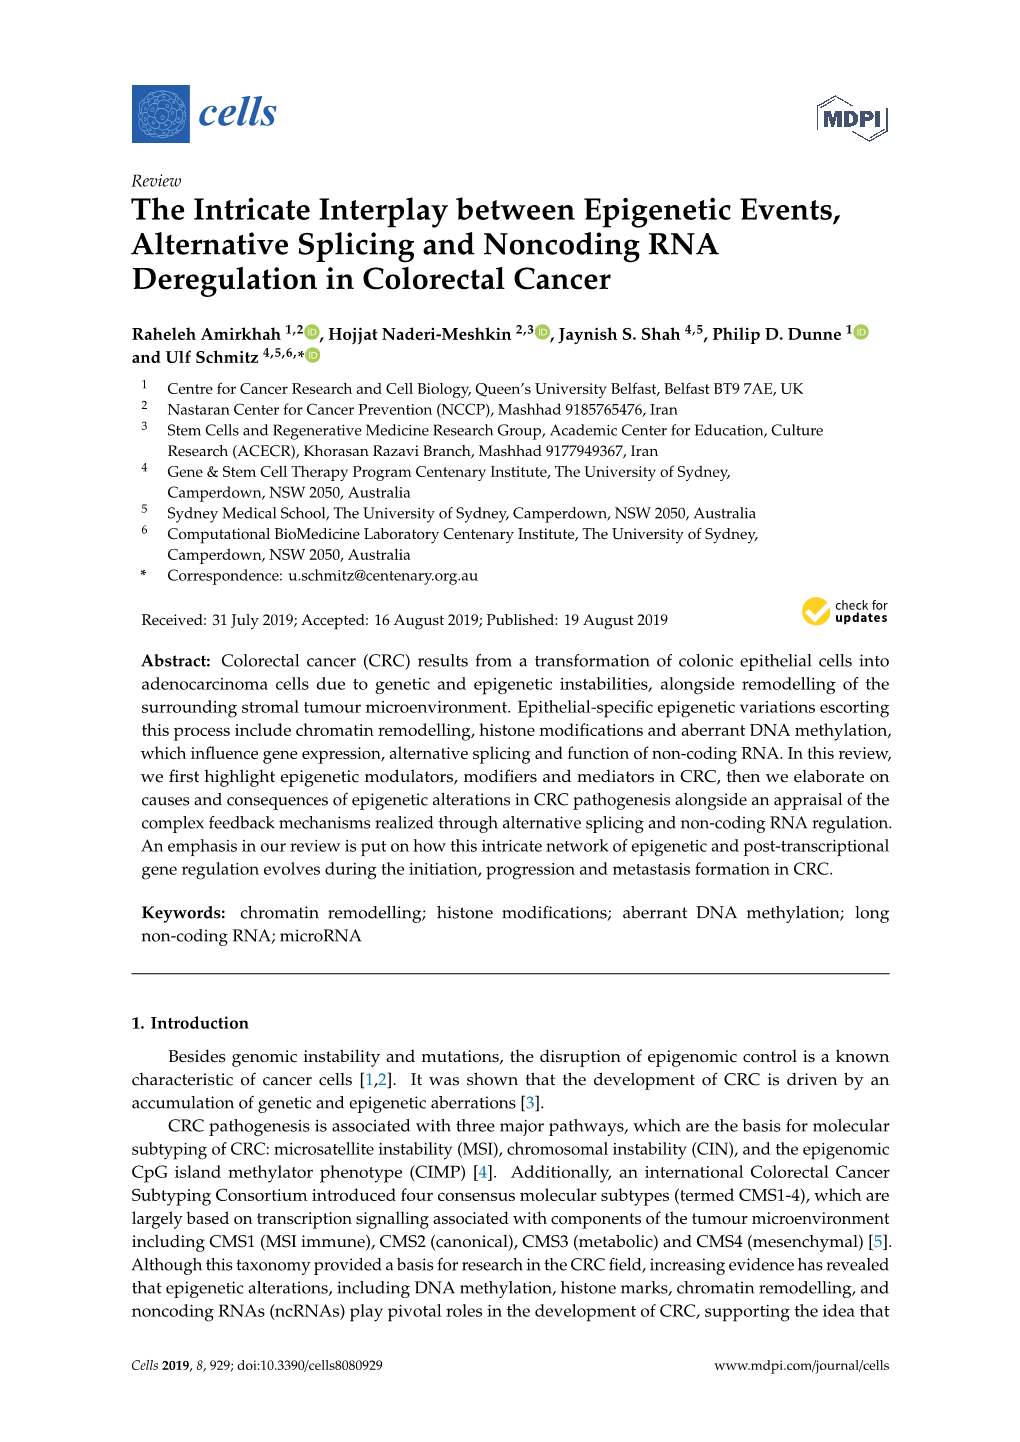 The Intricate Interplay Between Epigenetic Events, Alternative Splicing and Noncoding RNA Deregulation in Colorectal Cancer